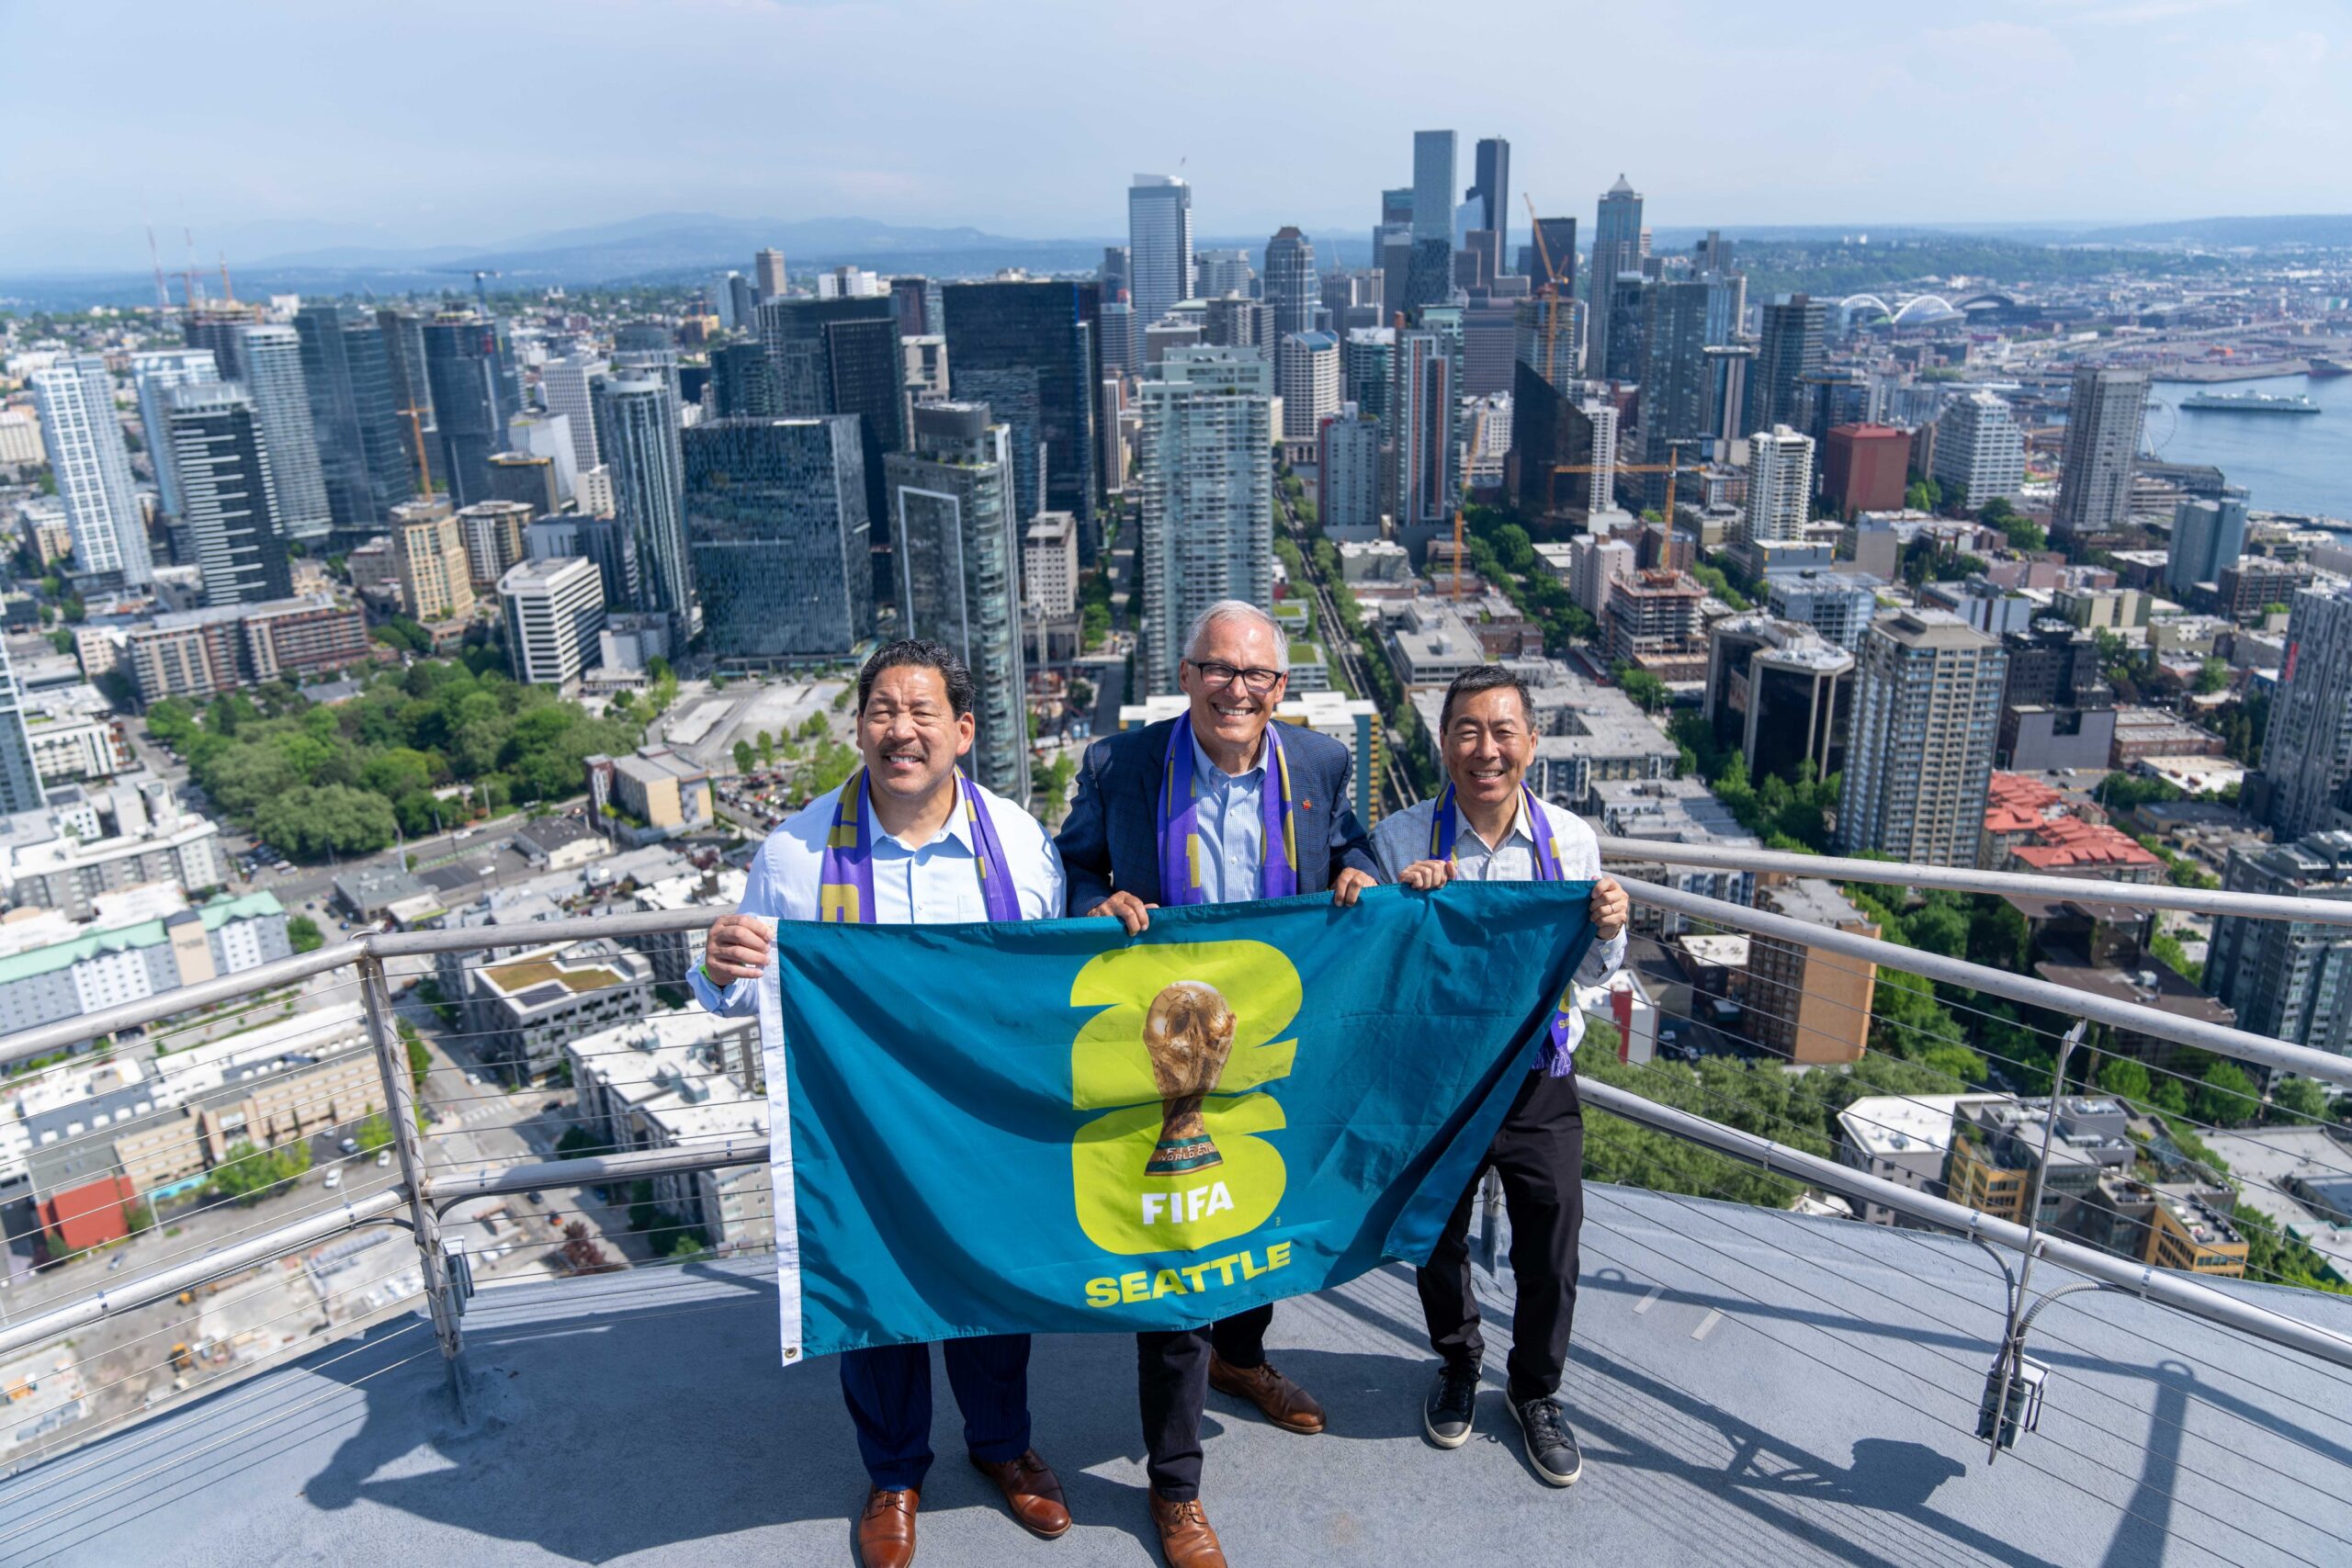 New Seattle 2026 World Cup committee chief aims to deliver a legacy: 'The  city will not flop